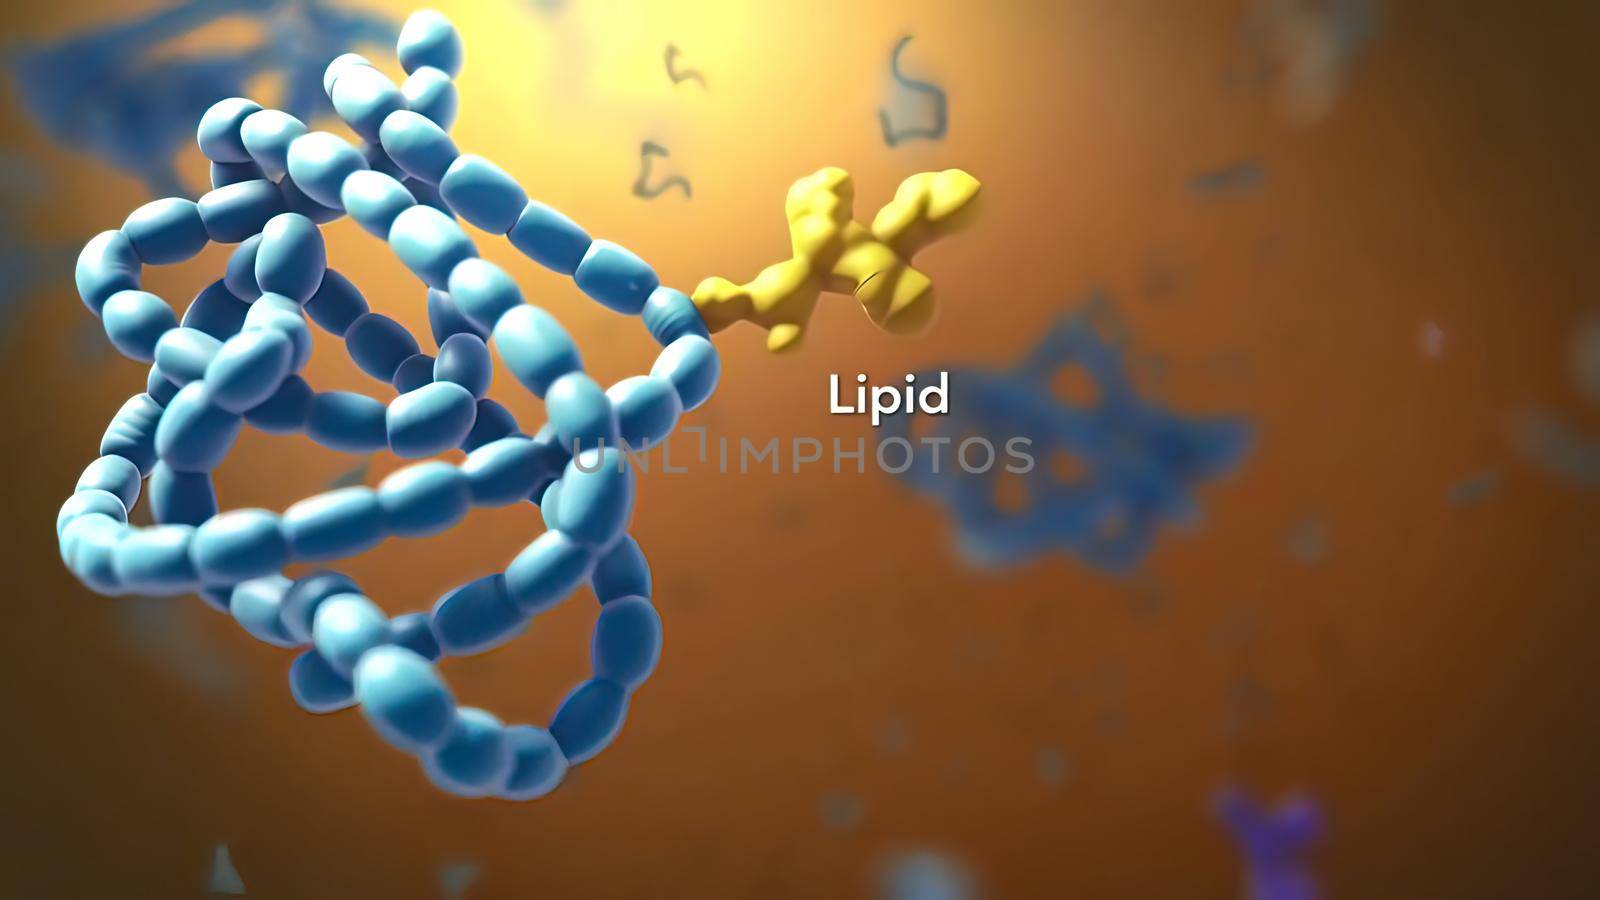 into molecular structure Molecules. Molecules that are laid out in an orderly row. 3D illustration. Alpha matte channel included in the end of the clip.